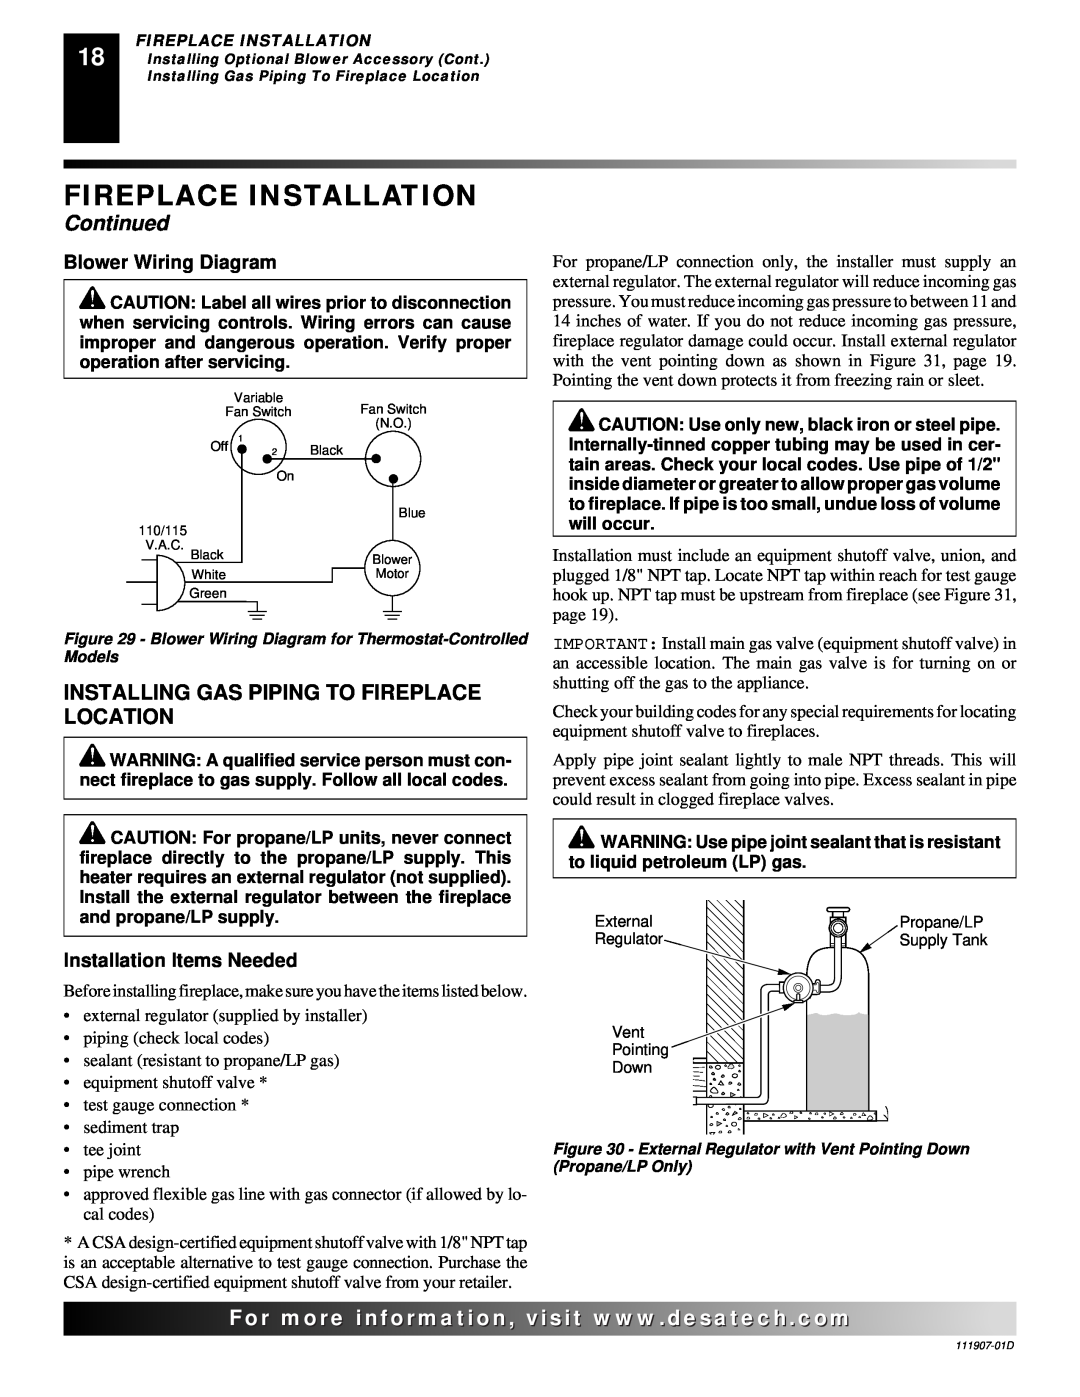 Desa V42EN-A, VV42ENB(1) Fireplace Installation, Continued, For..com, Blower Wiring Diagram, Installation Items Needed 